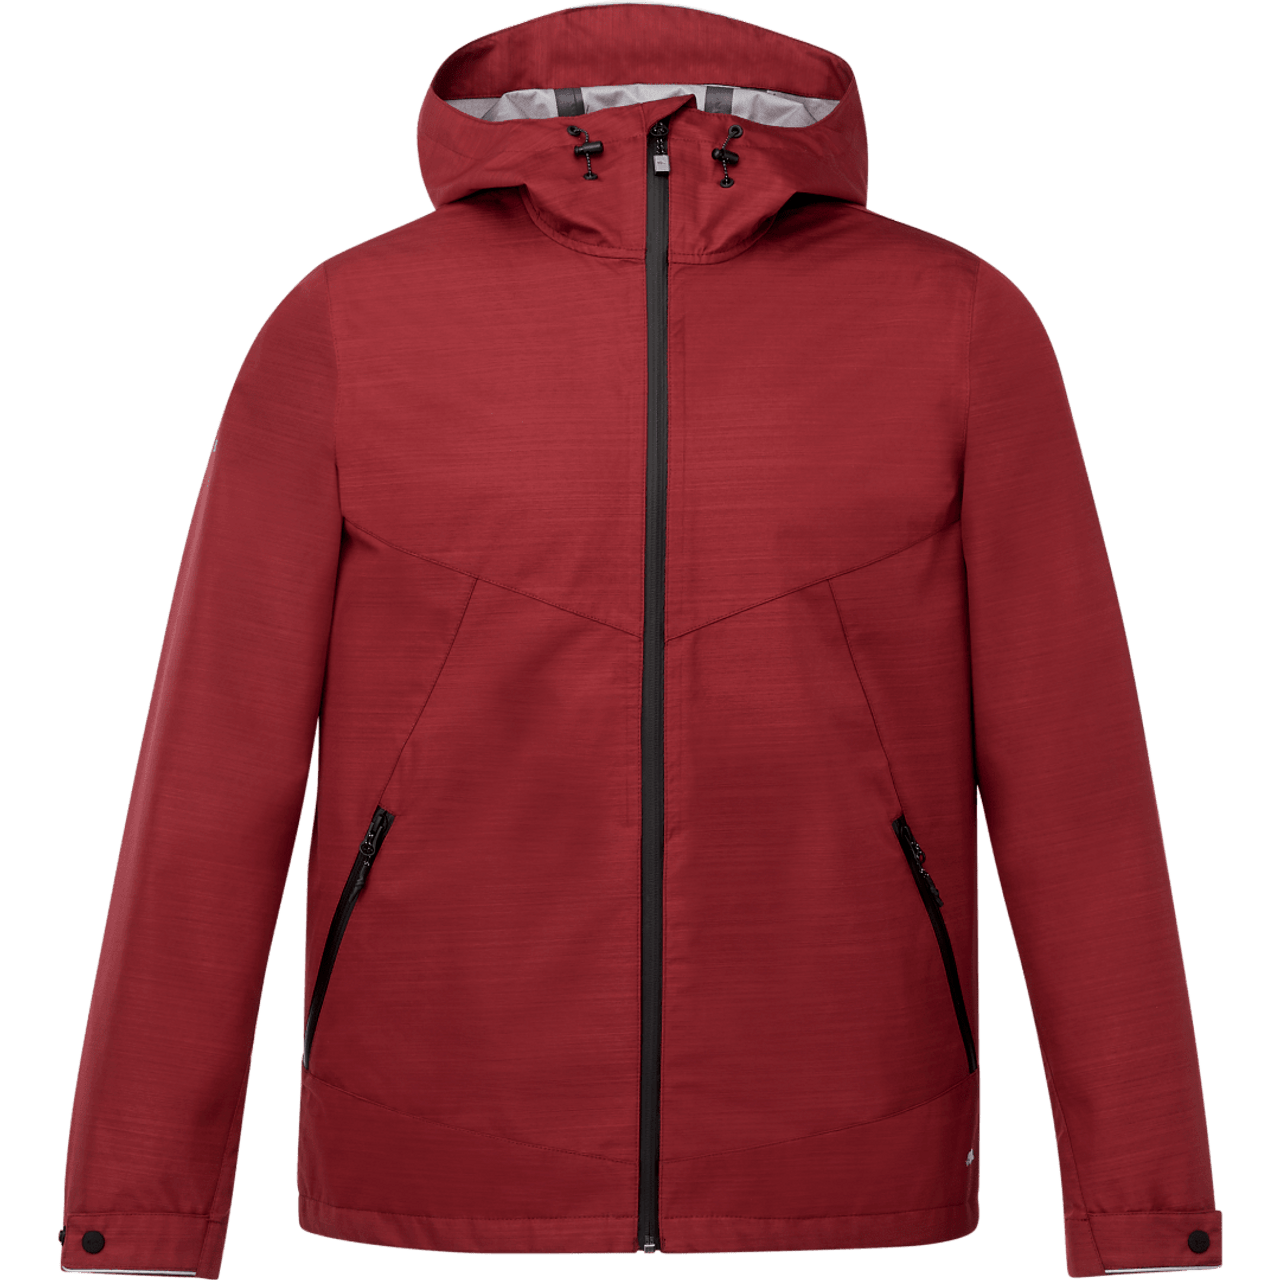 Embroidered Mens SHORELINE Roots73 Softshell